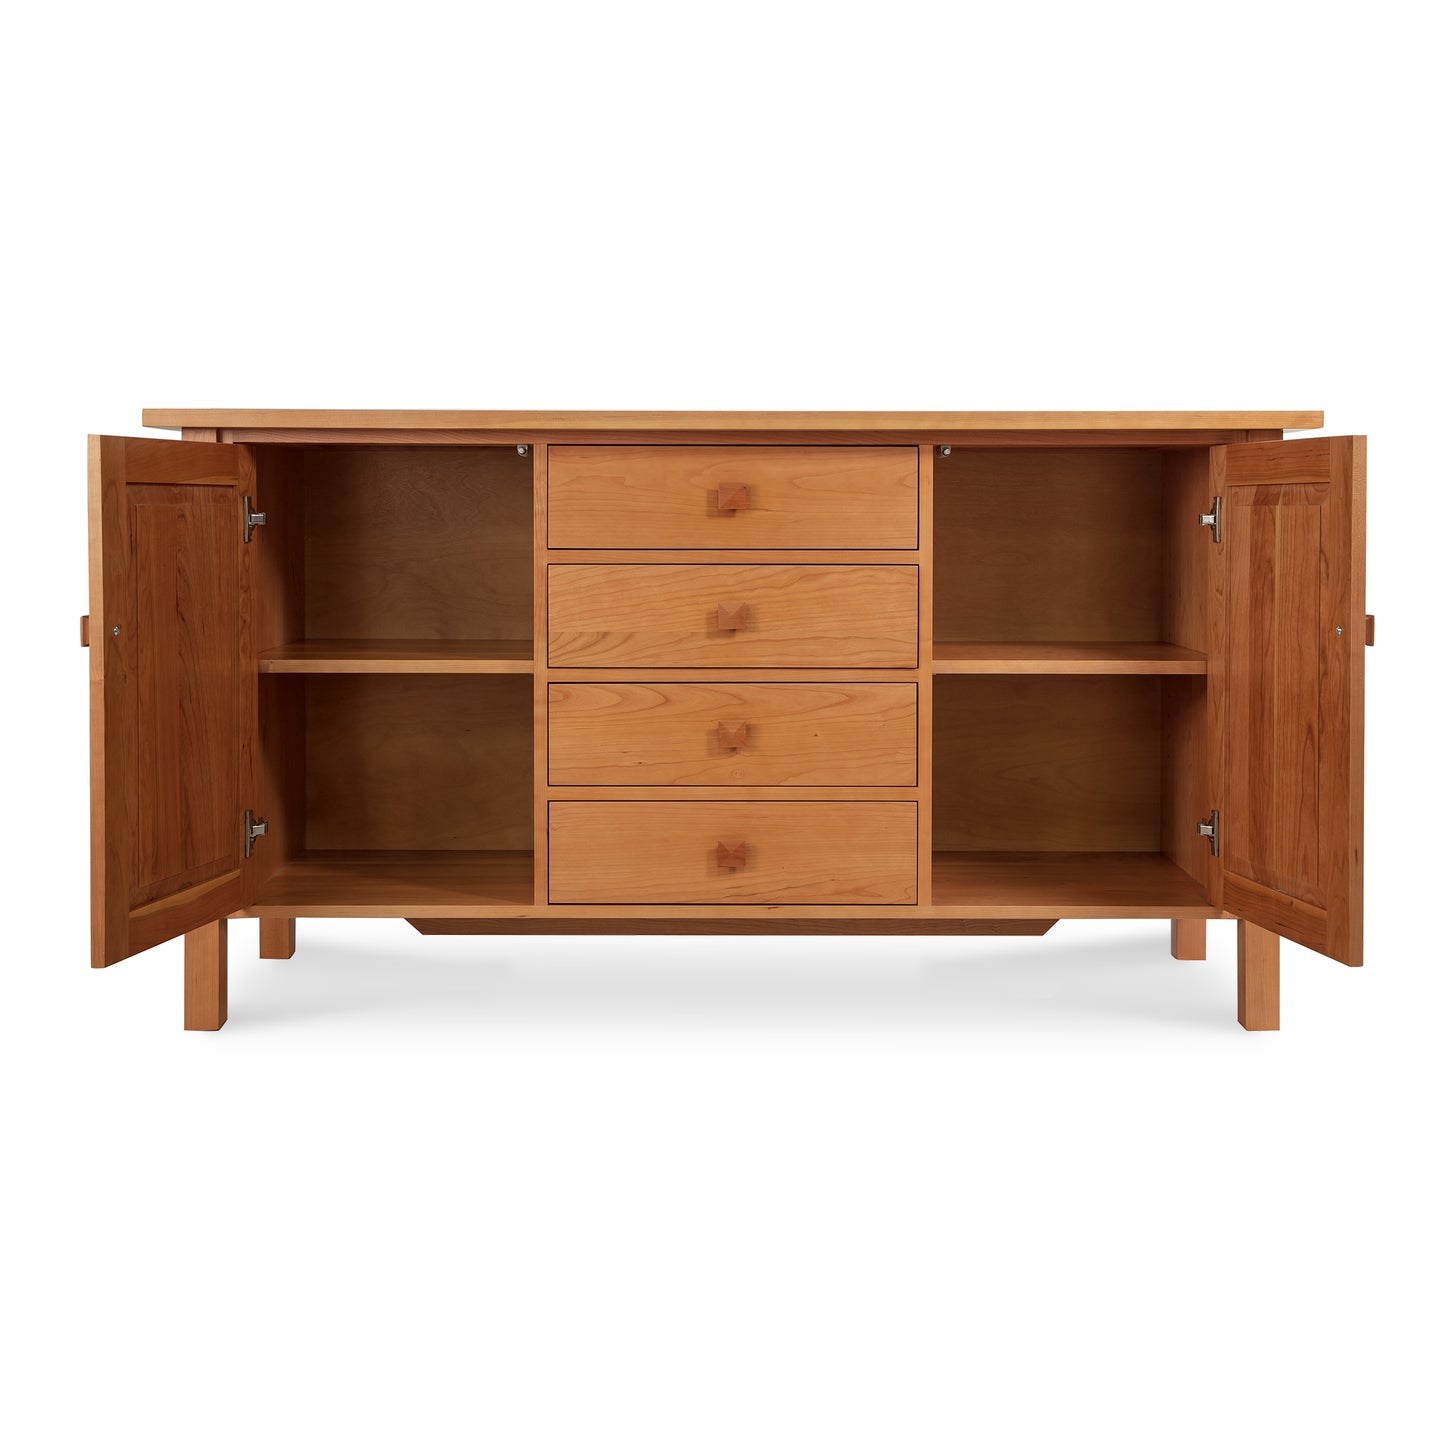 A Lyndon Furniture Modern Mission Sideboard with drawers and doors, perfect for a contemporary dining room.